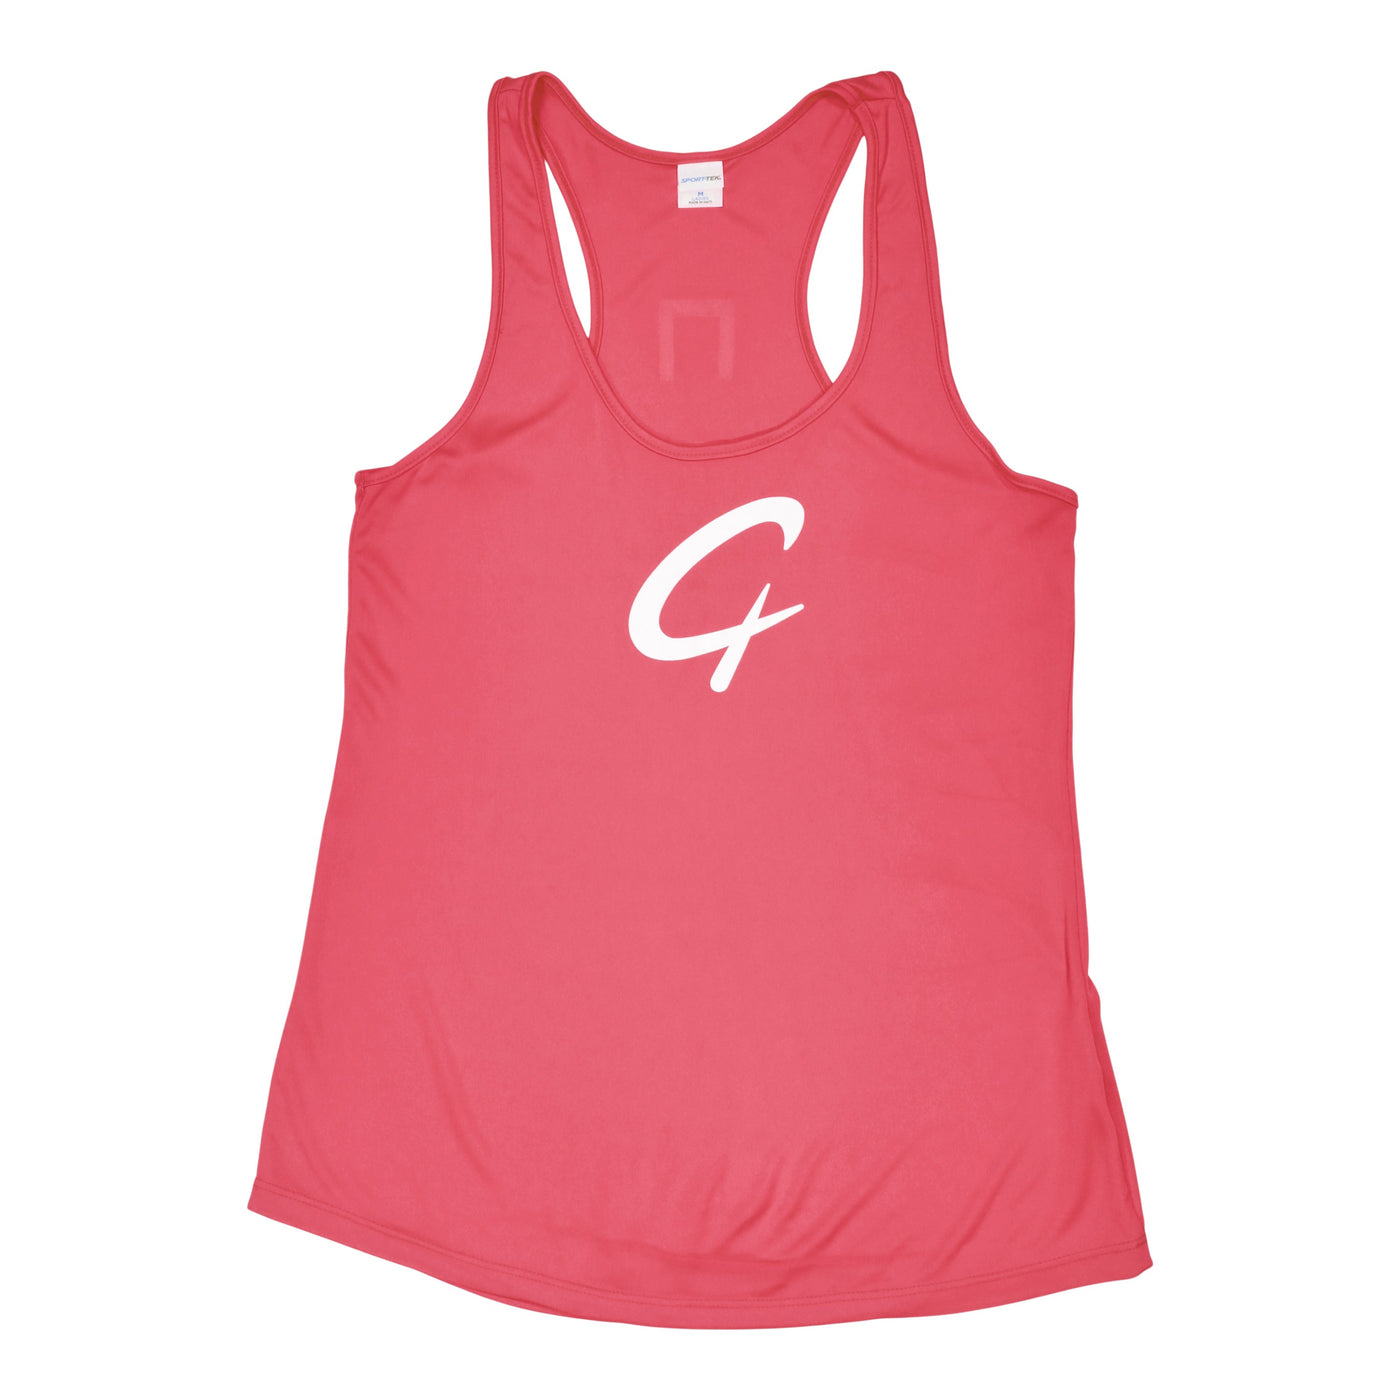 Created Women's Performance coral tank top front view